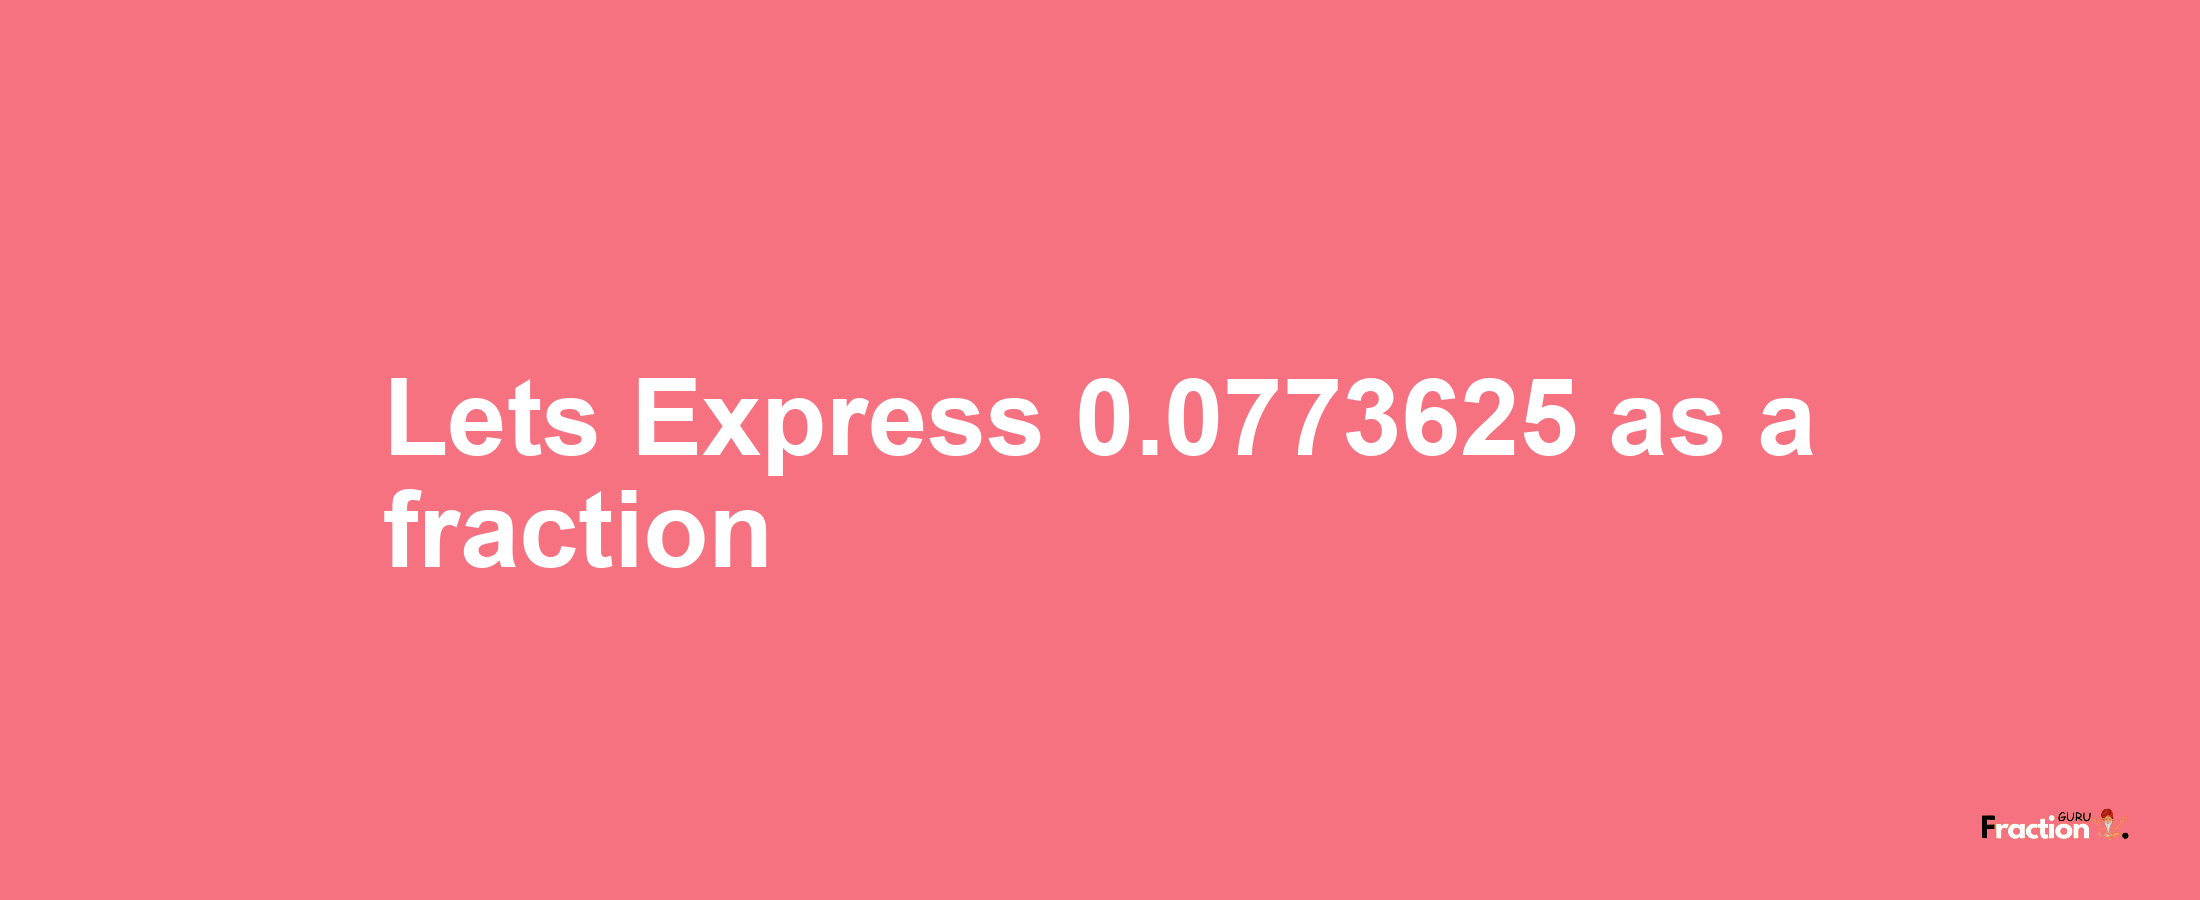 Lets Express 0.0773625 as afraction